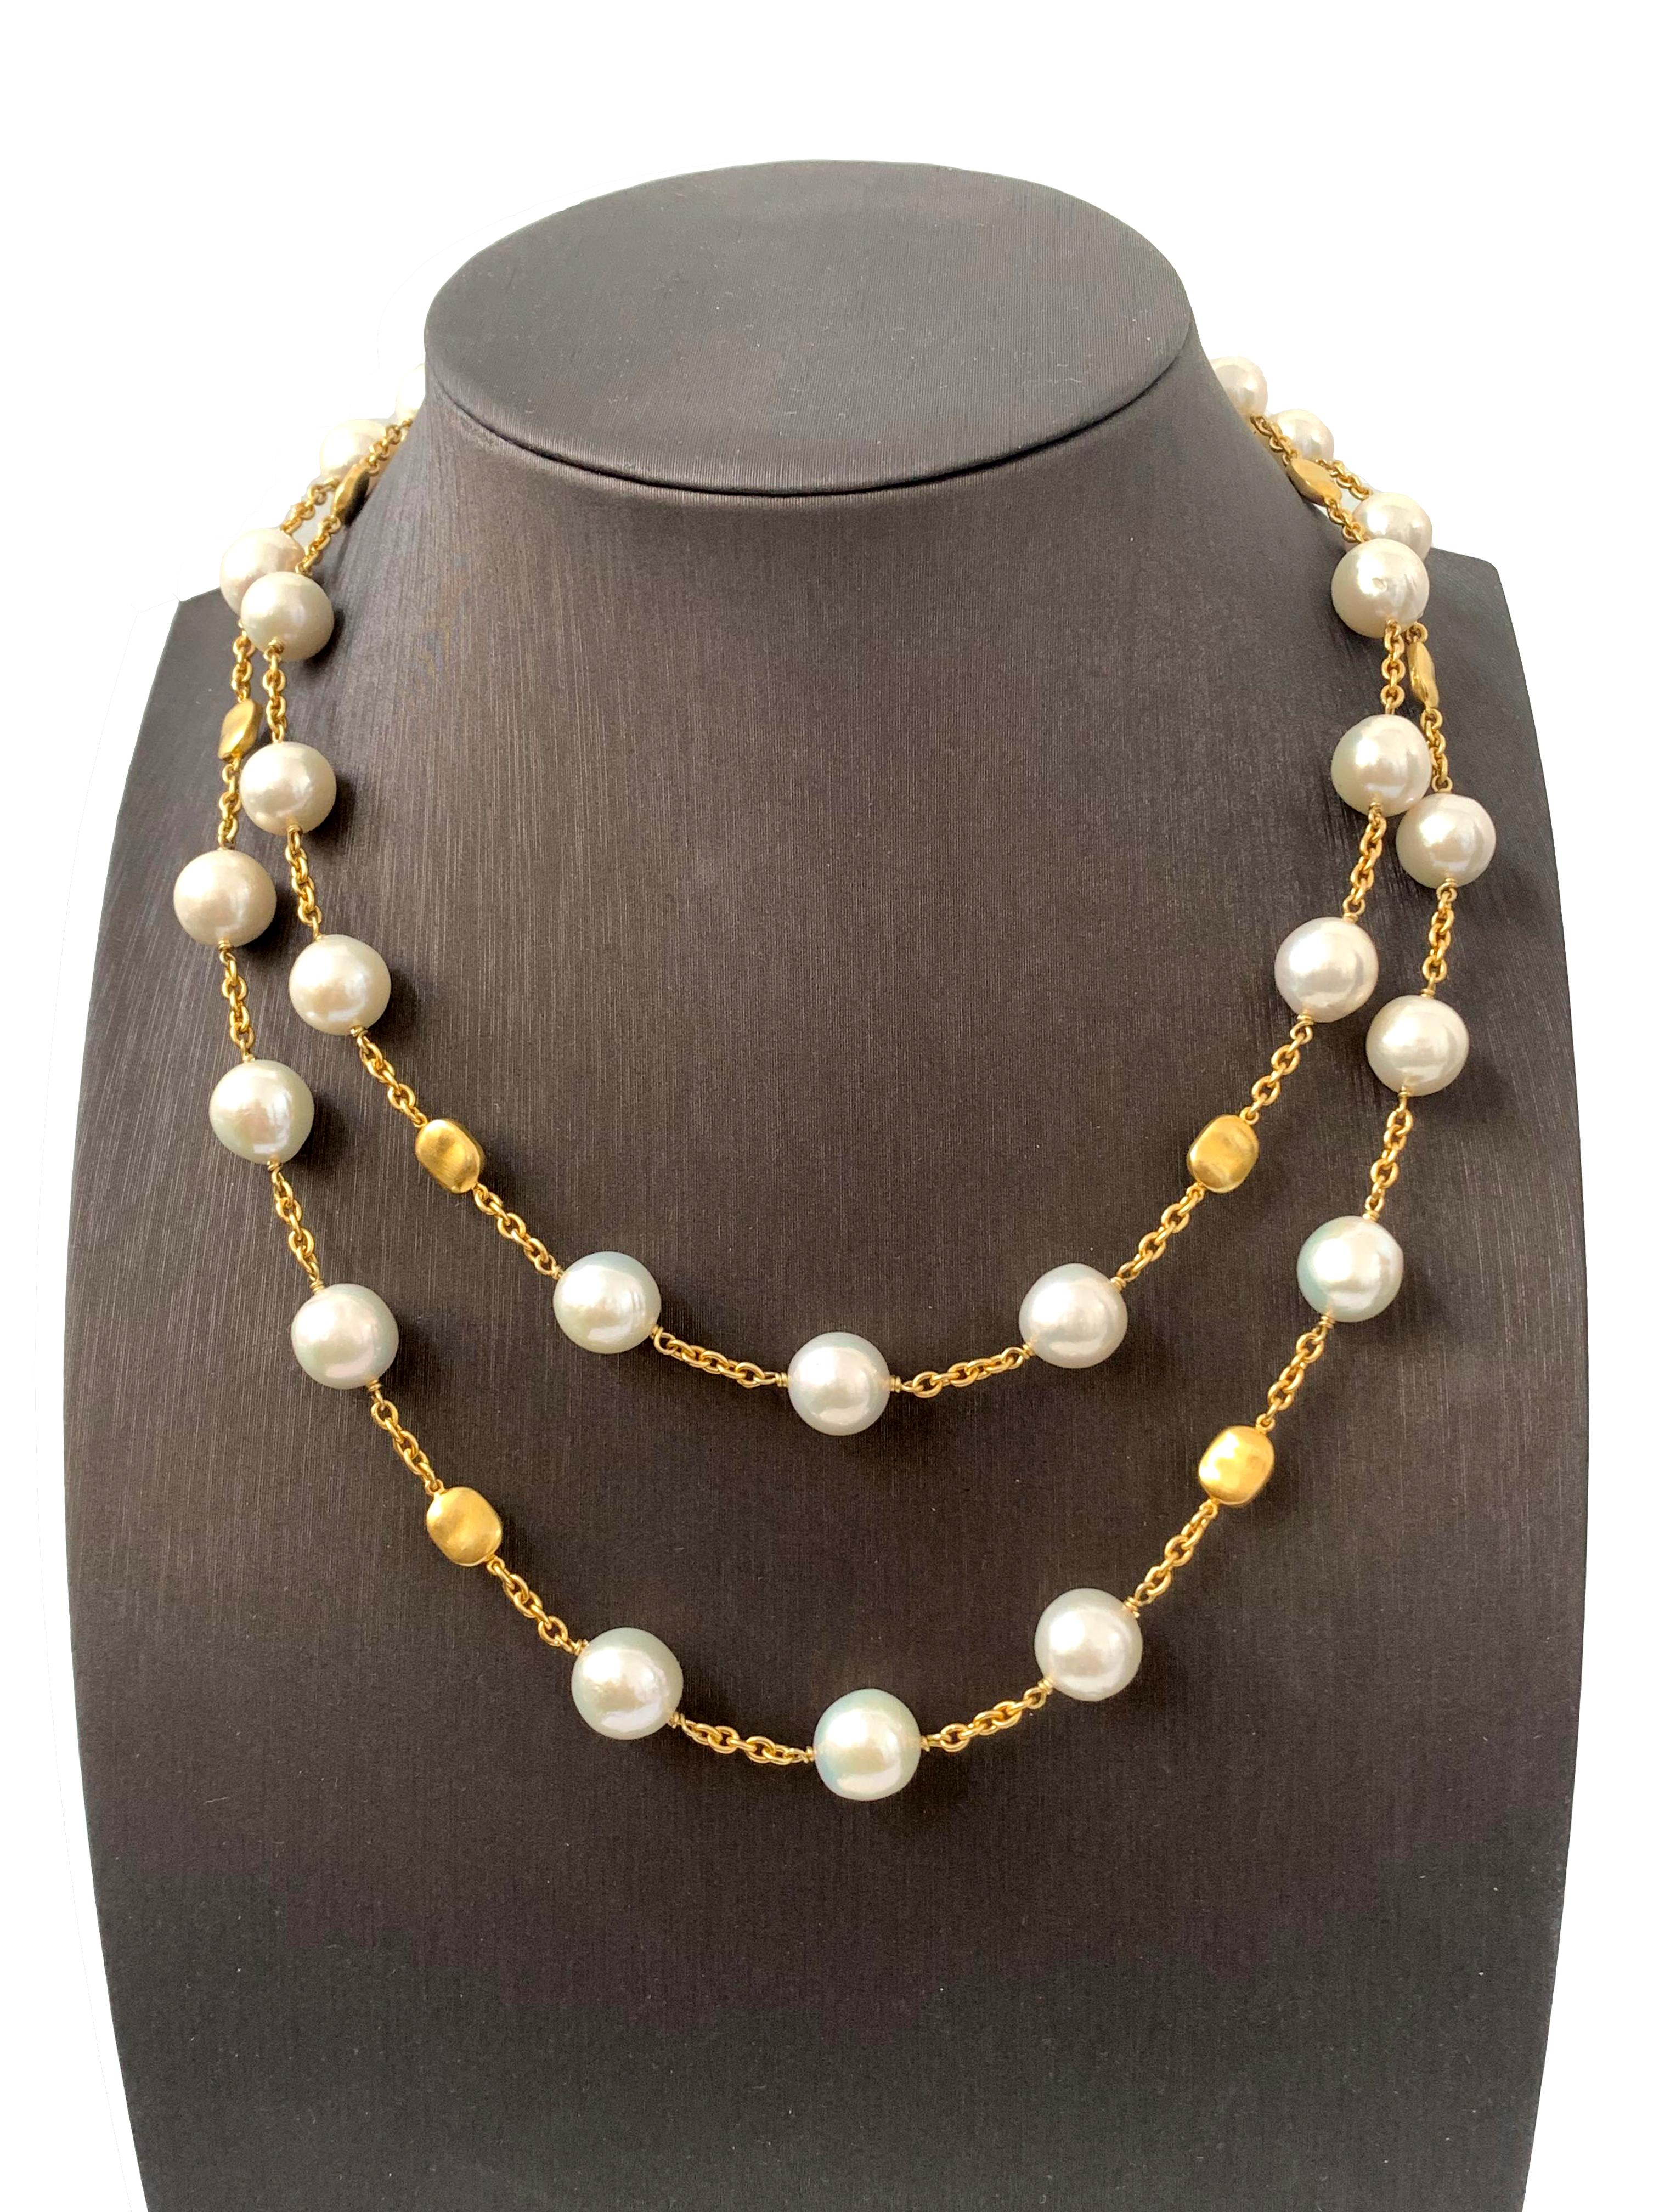 Contemporary Genuine Cultured Baroque Pearl Long Station Necklace

The necklace features 30 high-luster genuine cultured freshwater baroque pearls and 7 brushed-satin vermeil nuggets. The pearls measure approx. 12-13mm. Each station is hand wire